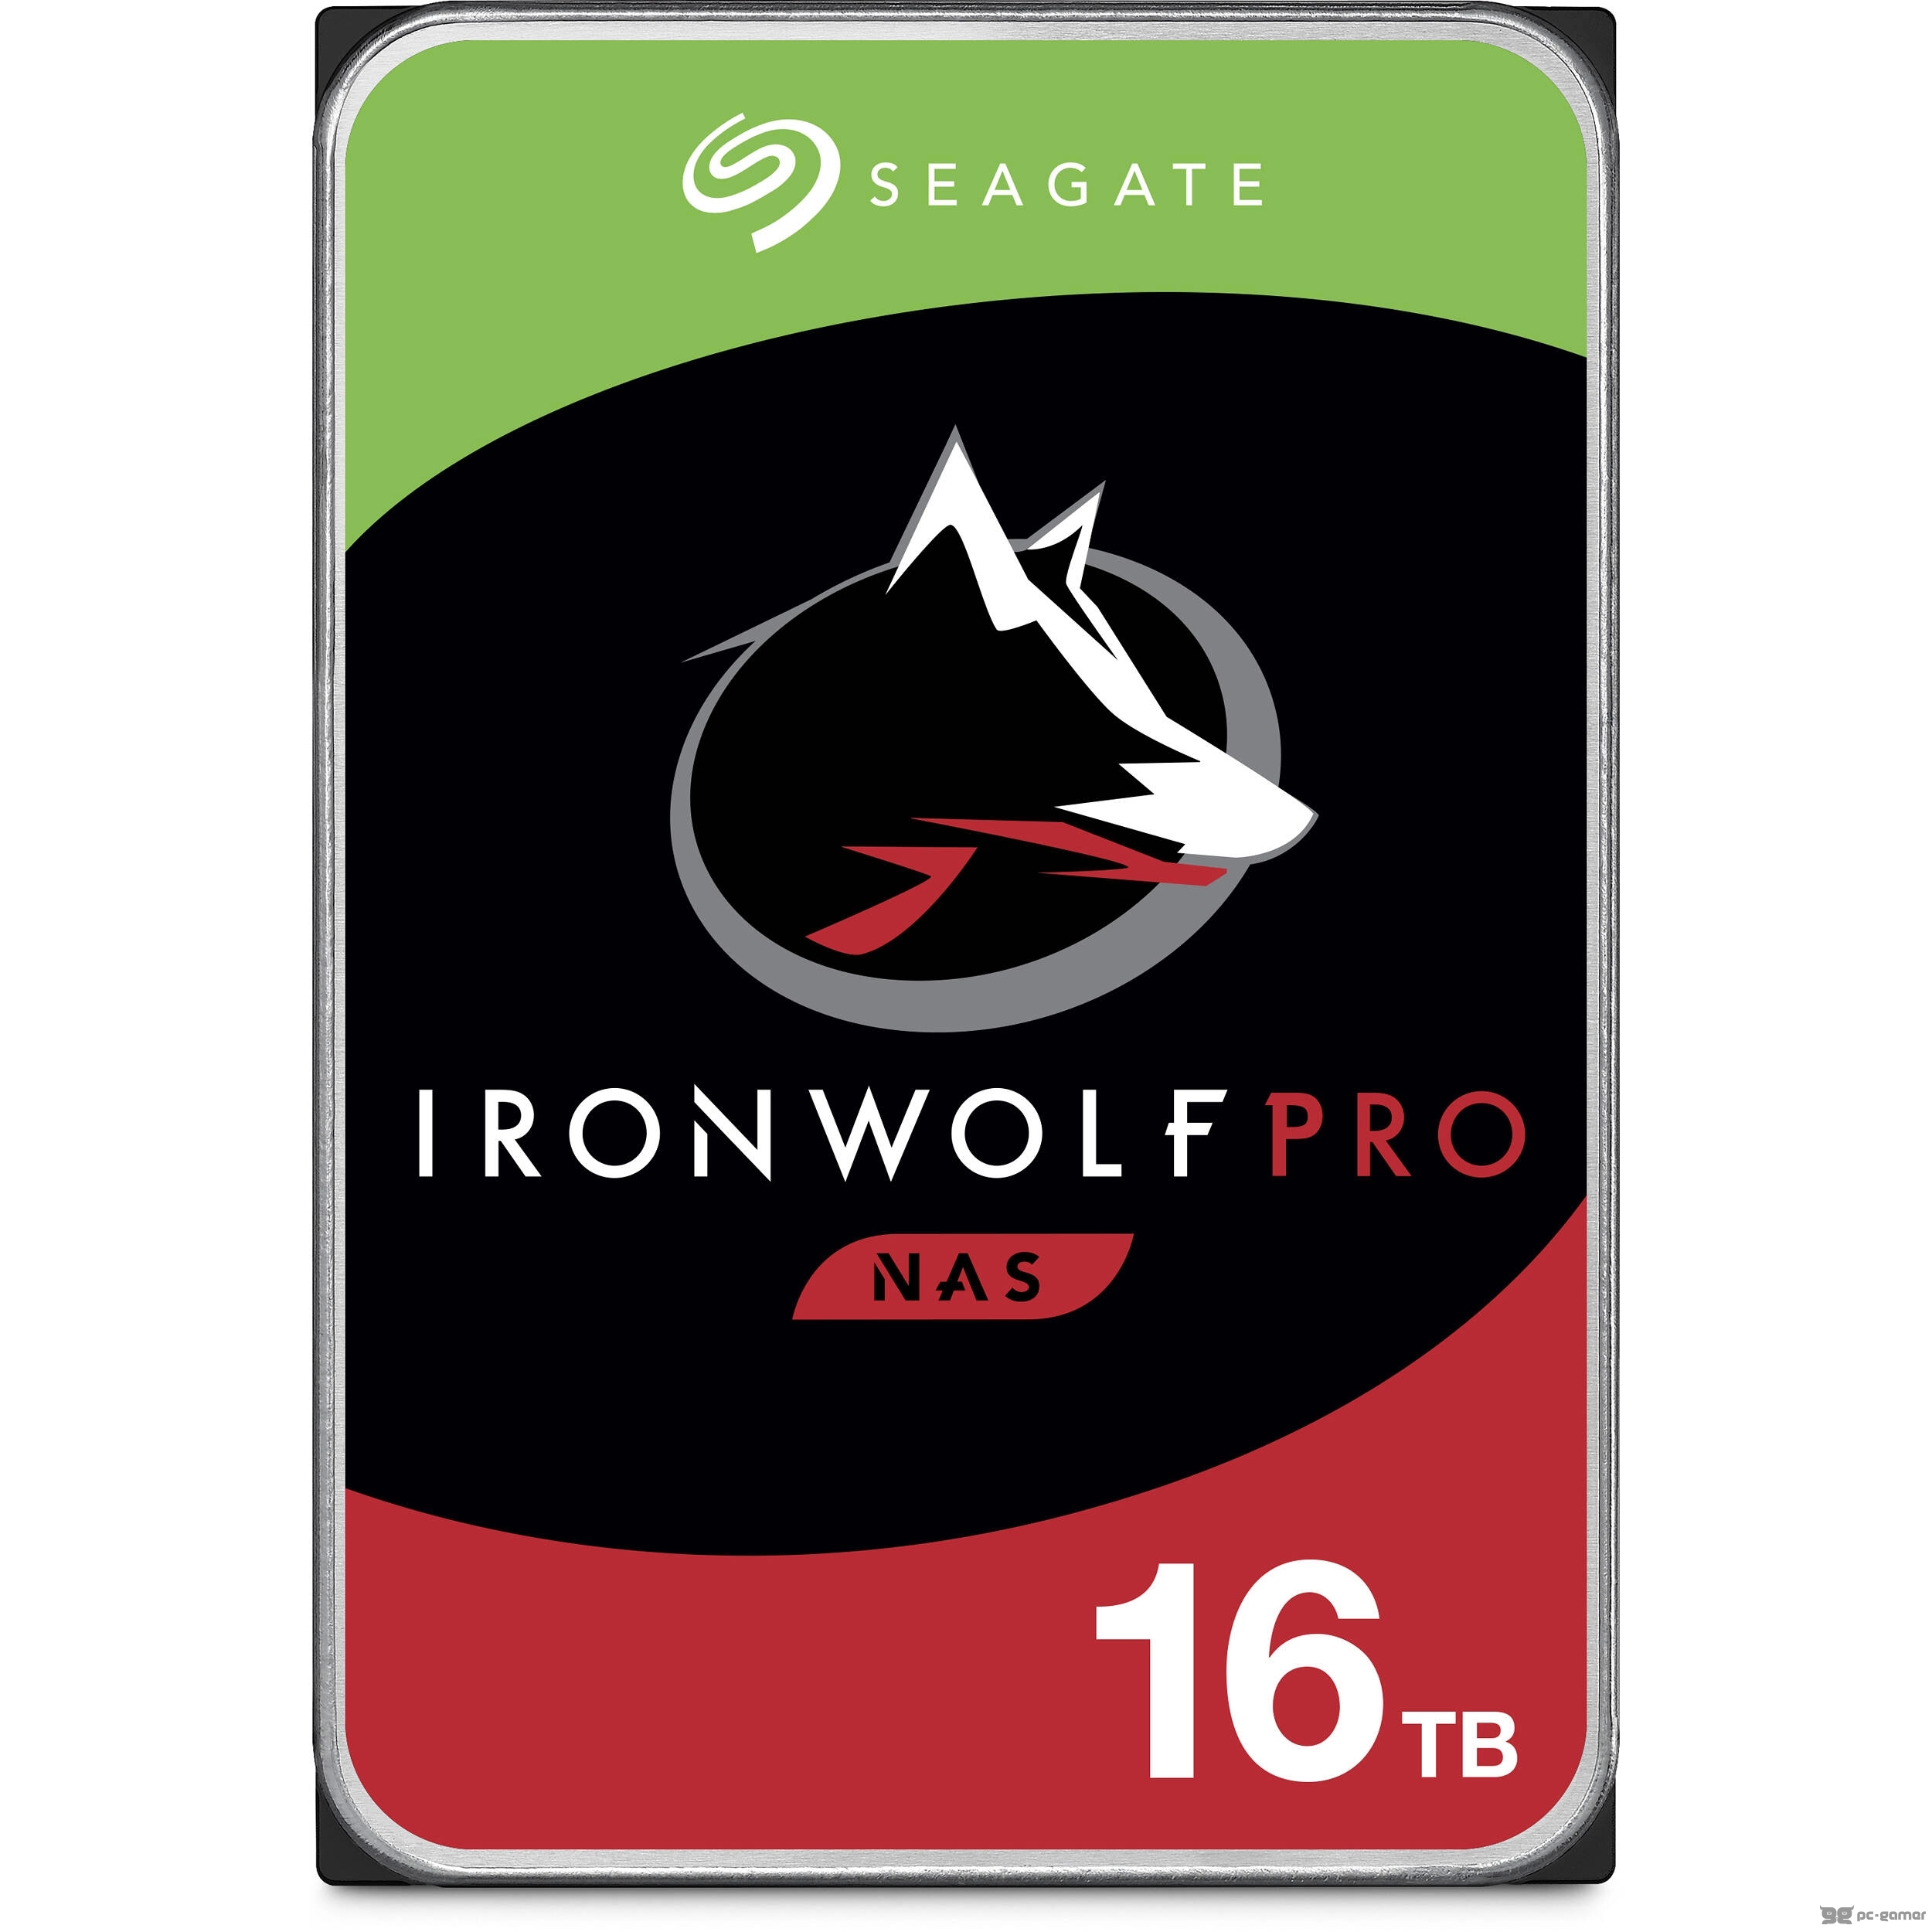 SEAGATE IronWolf PRO NAS HDD 16TB, ST16000NT001, 256MB cache, SATA 6Gb/s, 7200 rpm, 24/7